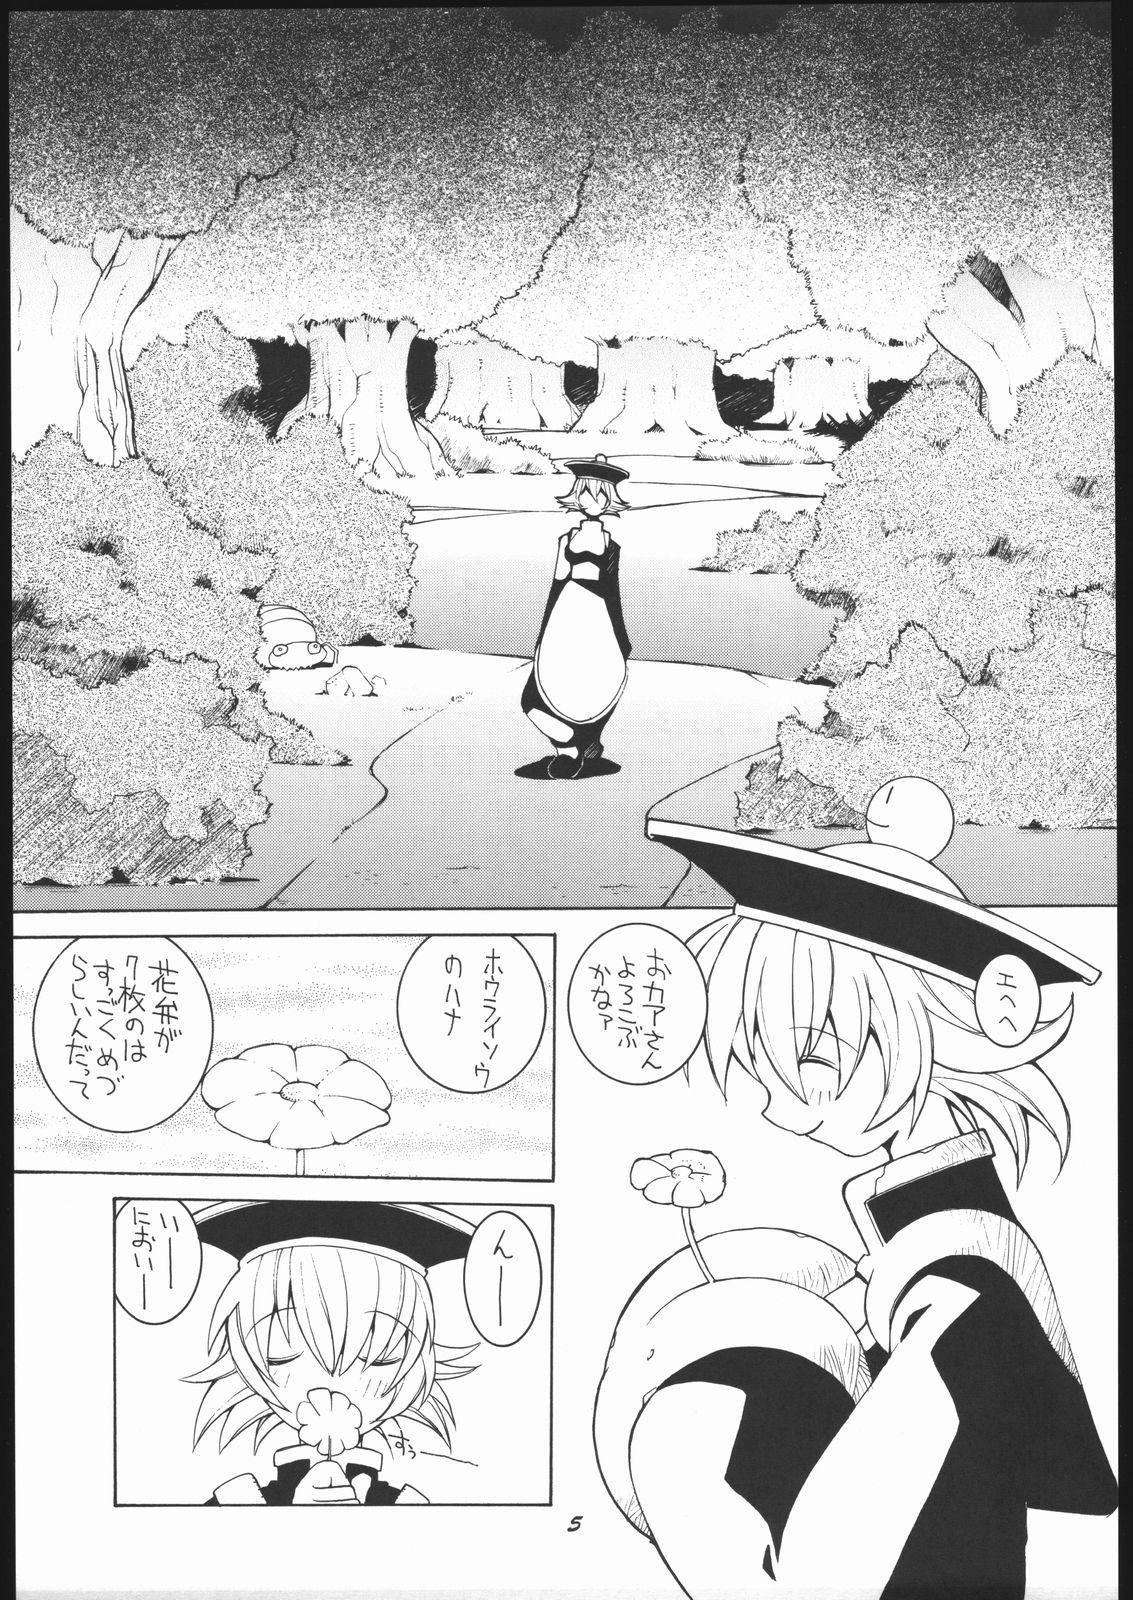 Maid Nehan 5 - Darkstalkers Ano - Page 4